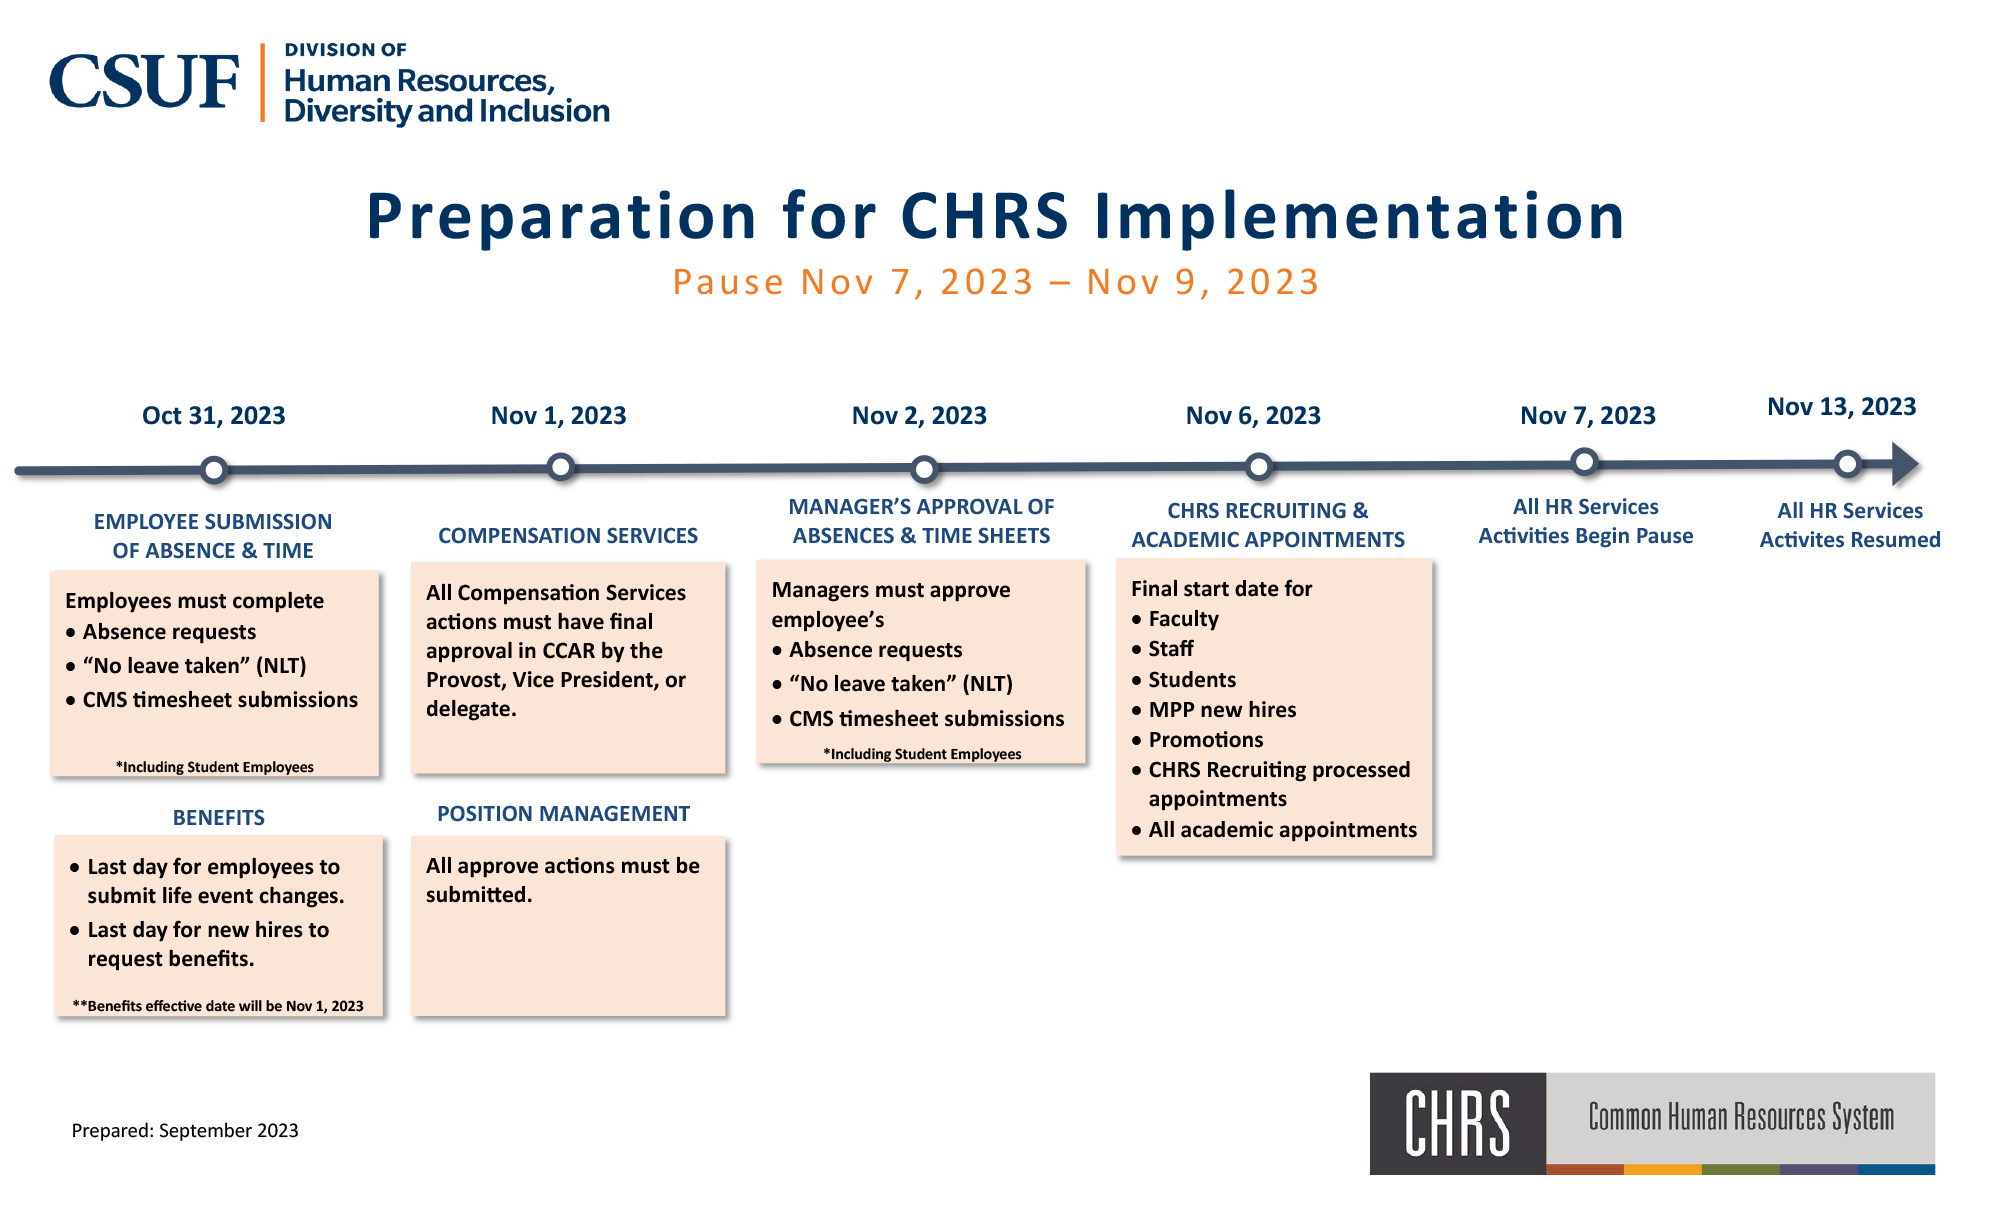 CHRS timeline for 2022 as of Oct 5